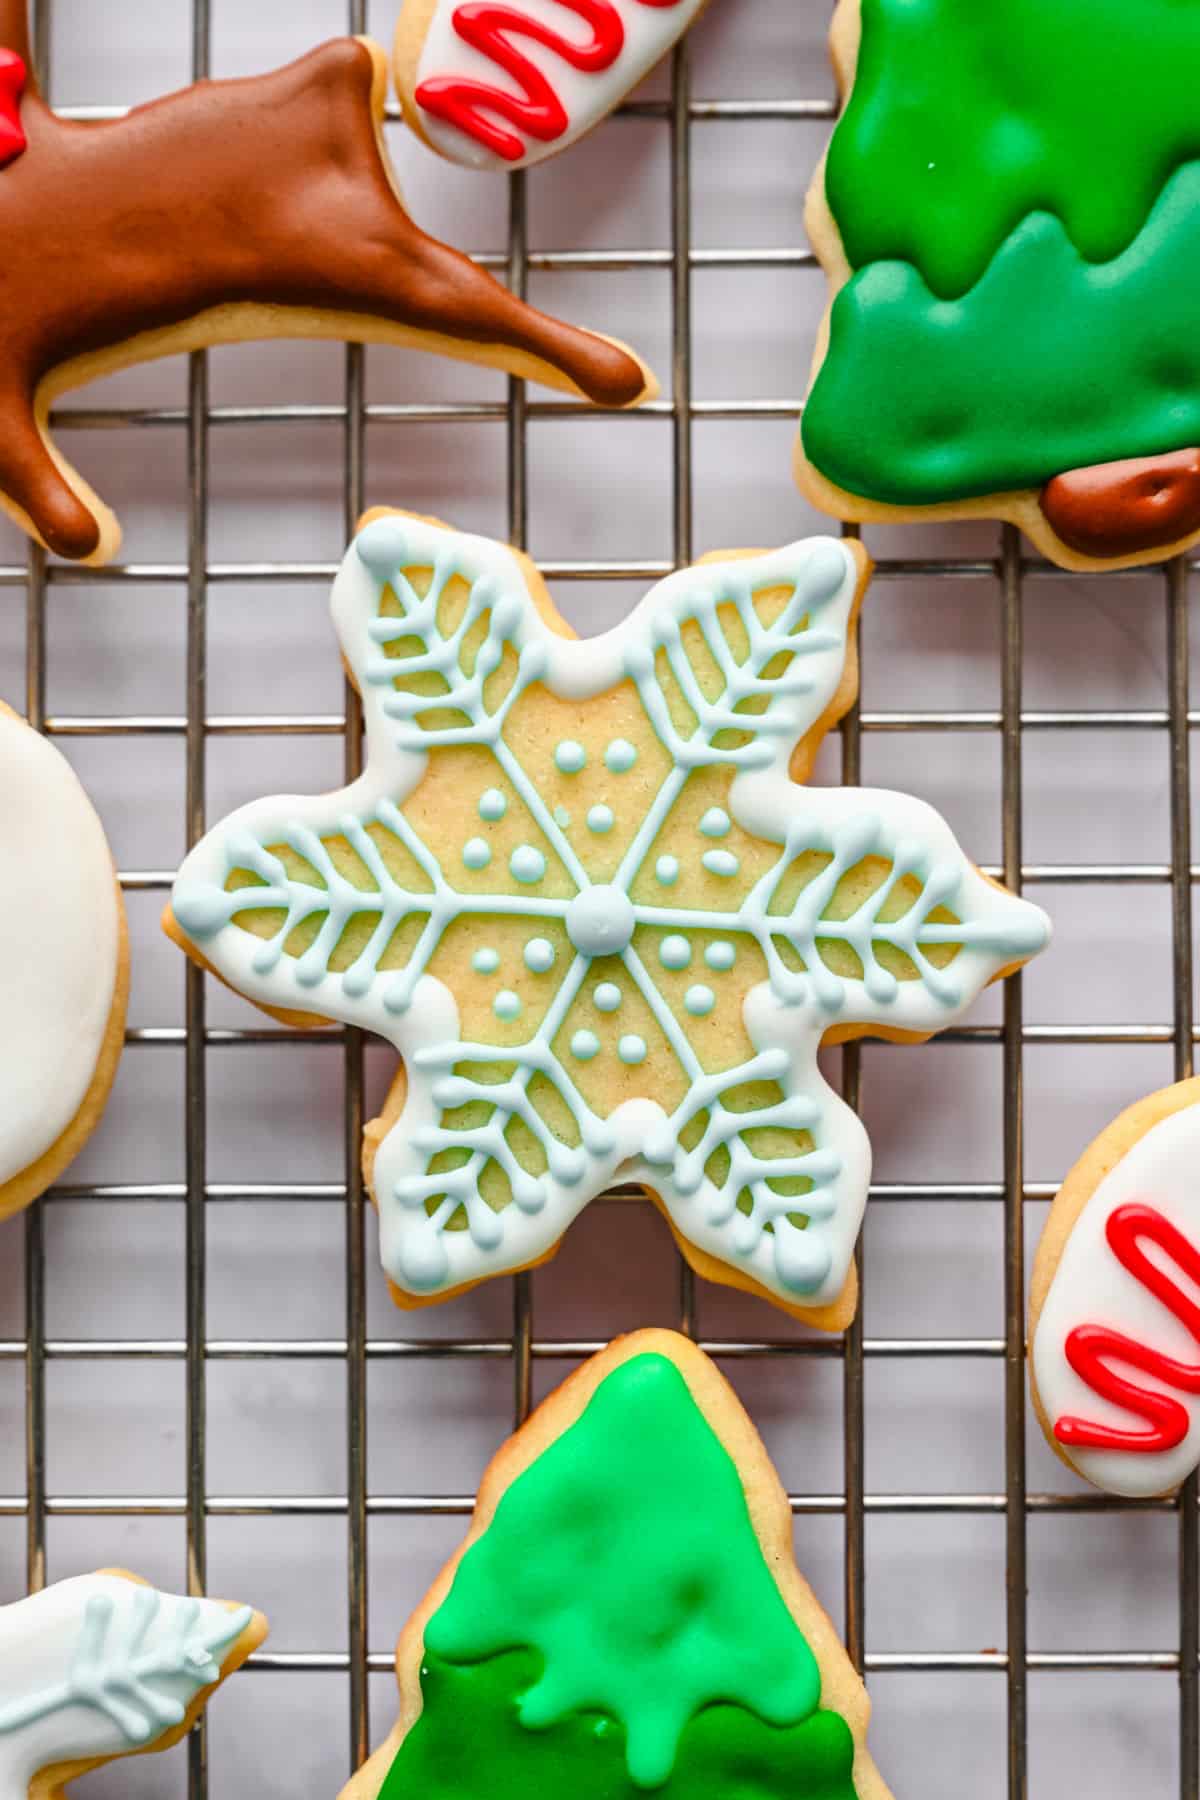 A cut out sugar cookie decorated like a snowflake with blue royal icing.